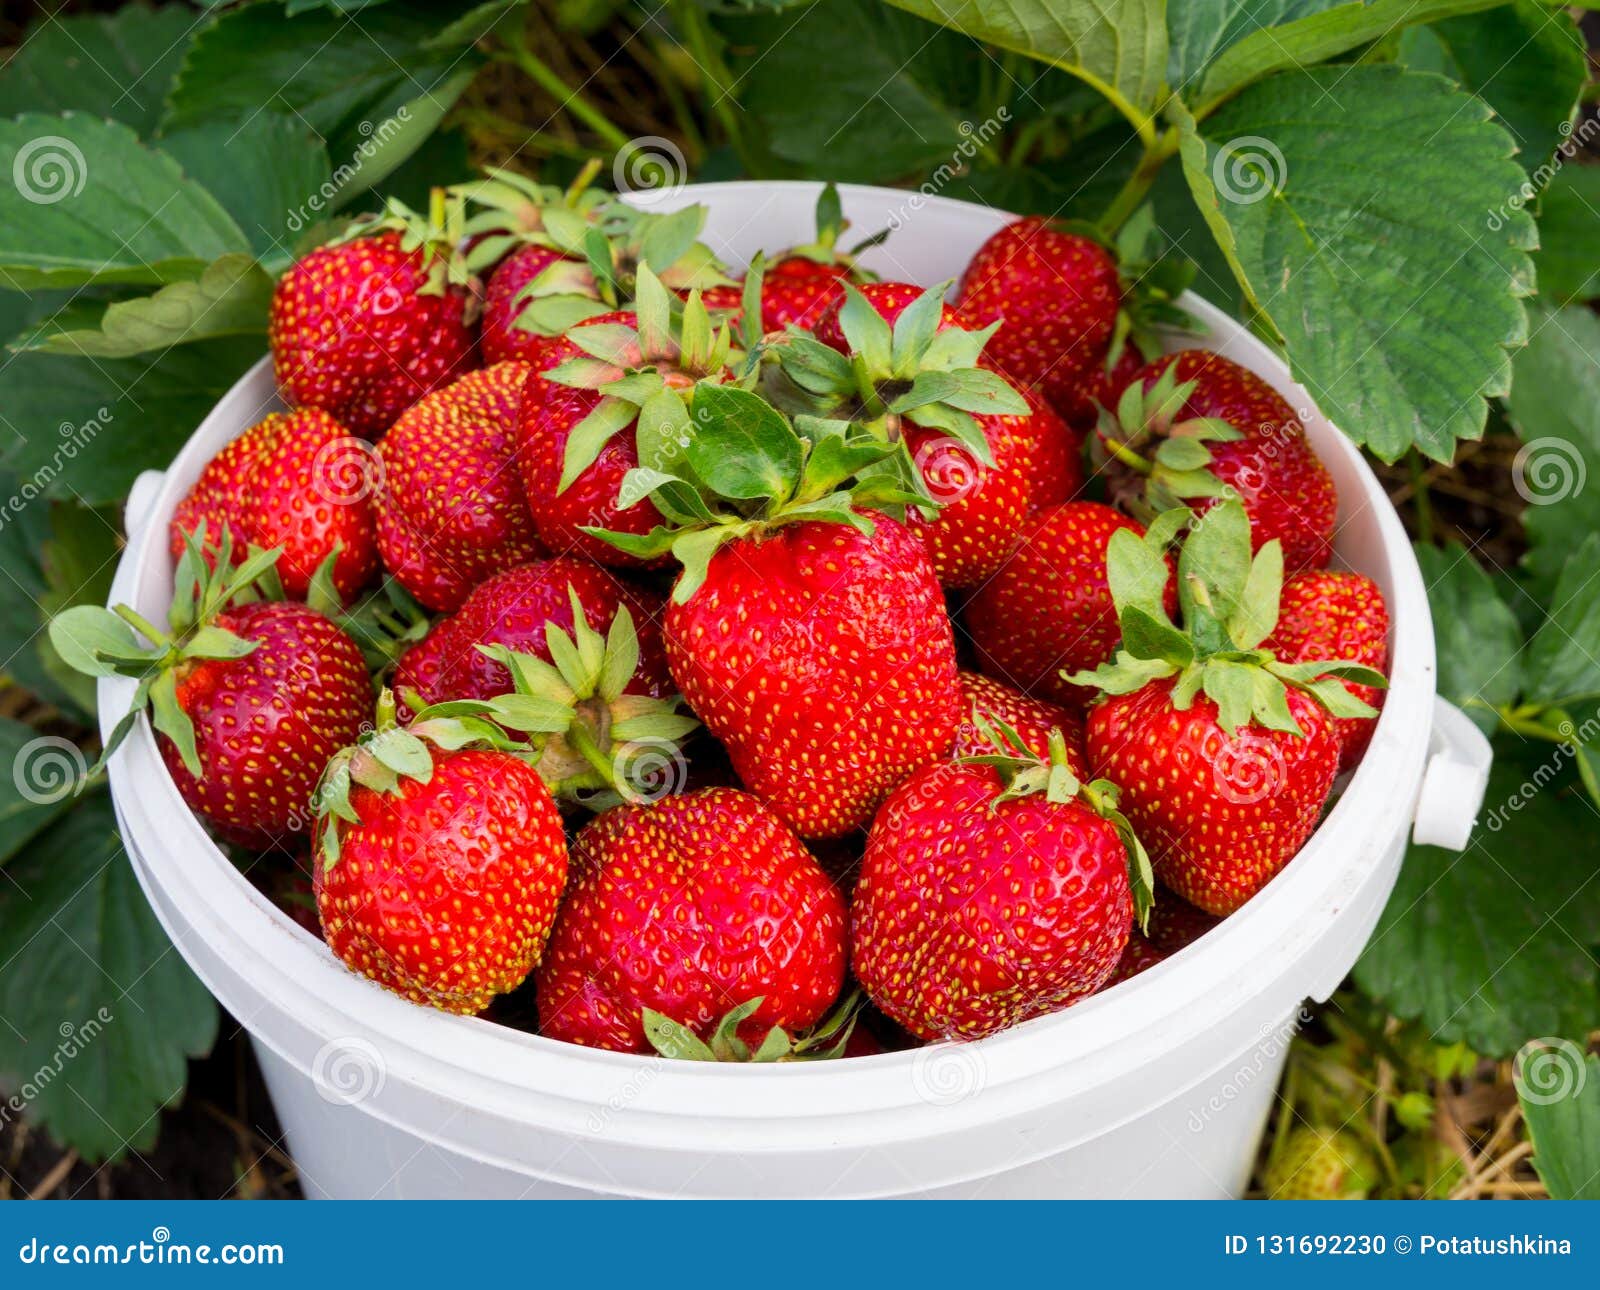 Large Strawberries in a Plastic Bucket at the Berry Bush Stock Photo -  Image of seasonal, juicy: 131692230